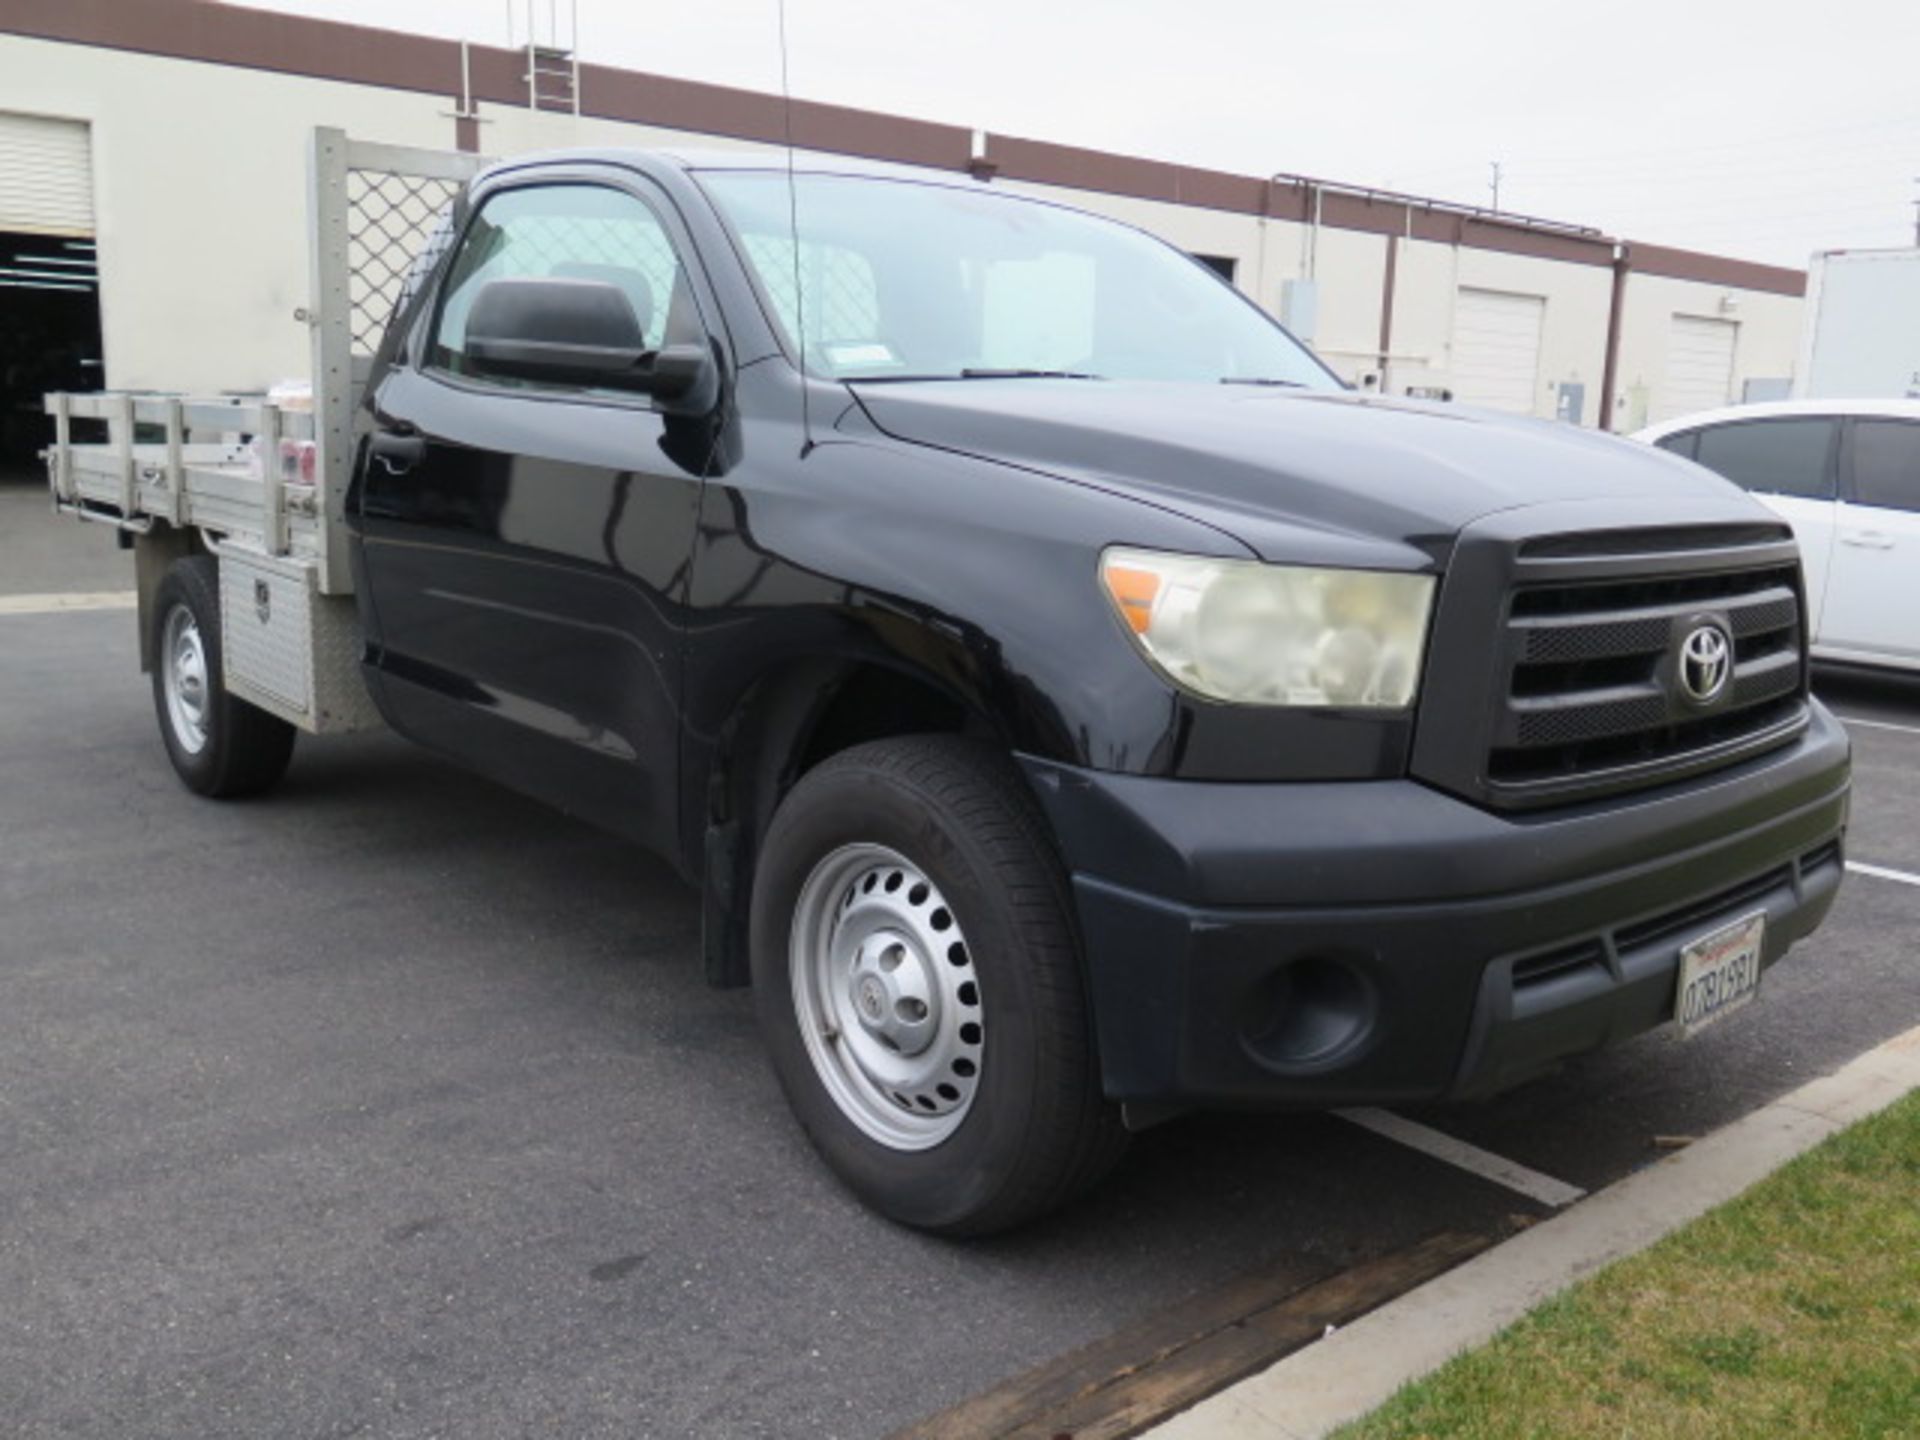 2011 Toyota Tundra 12’ Stake Bed Truck Lisc# 07819B1 w/ Gas Engine, Automatic Trans, SOLD AS IS - Image 3 of 24